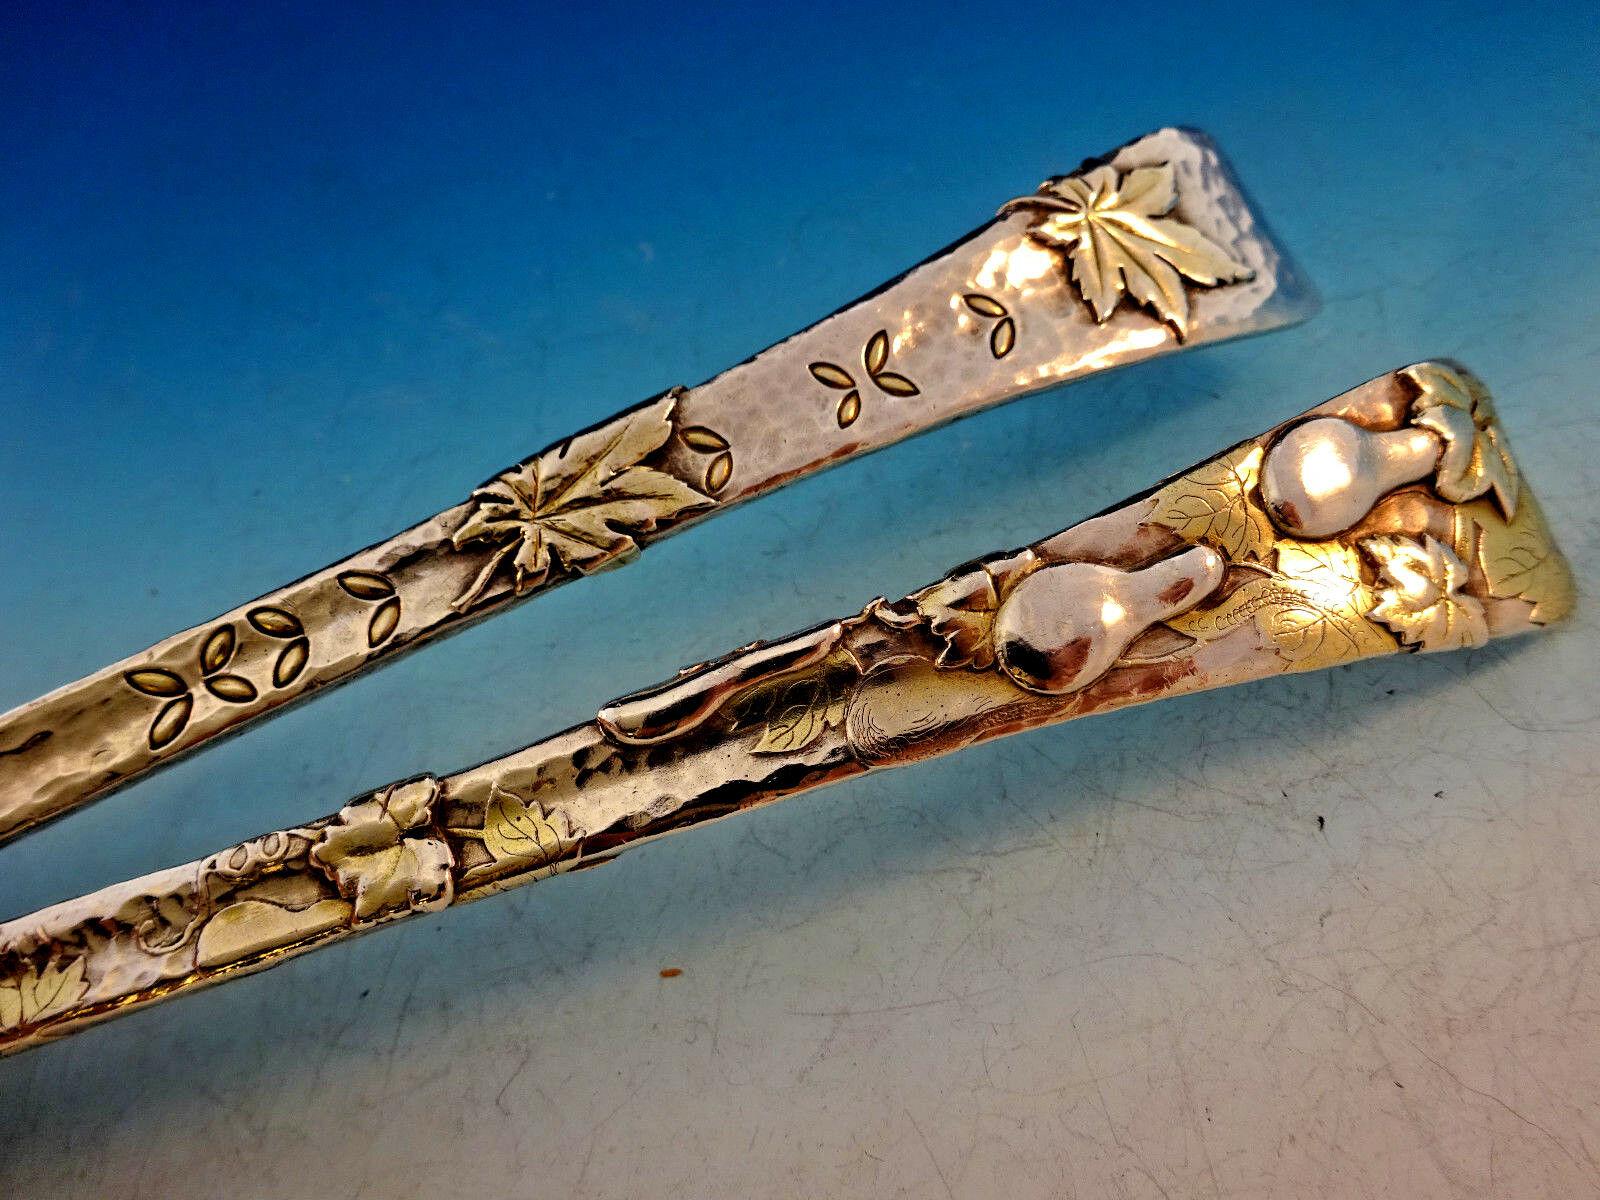 Rare sterling silver long salad serving set with gold-washed bowls and applied elements 10 1/2